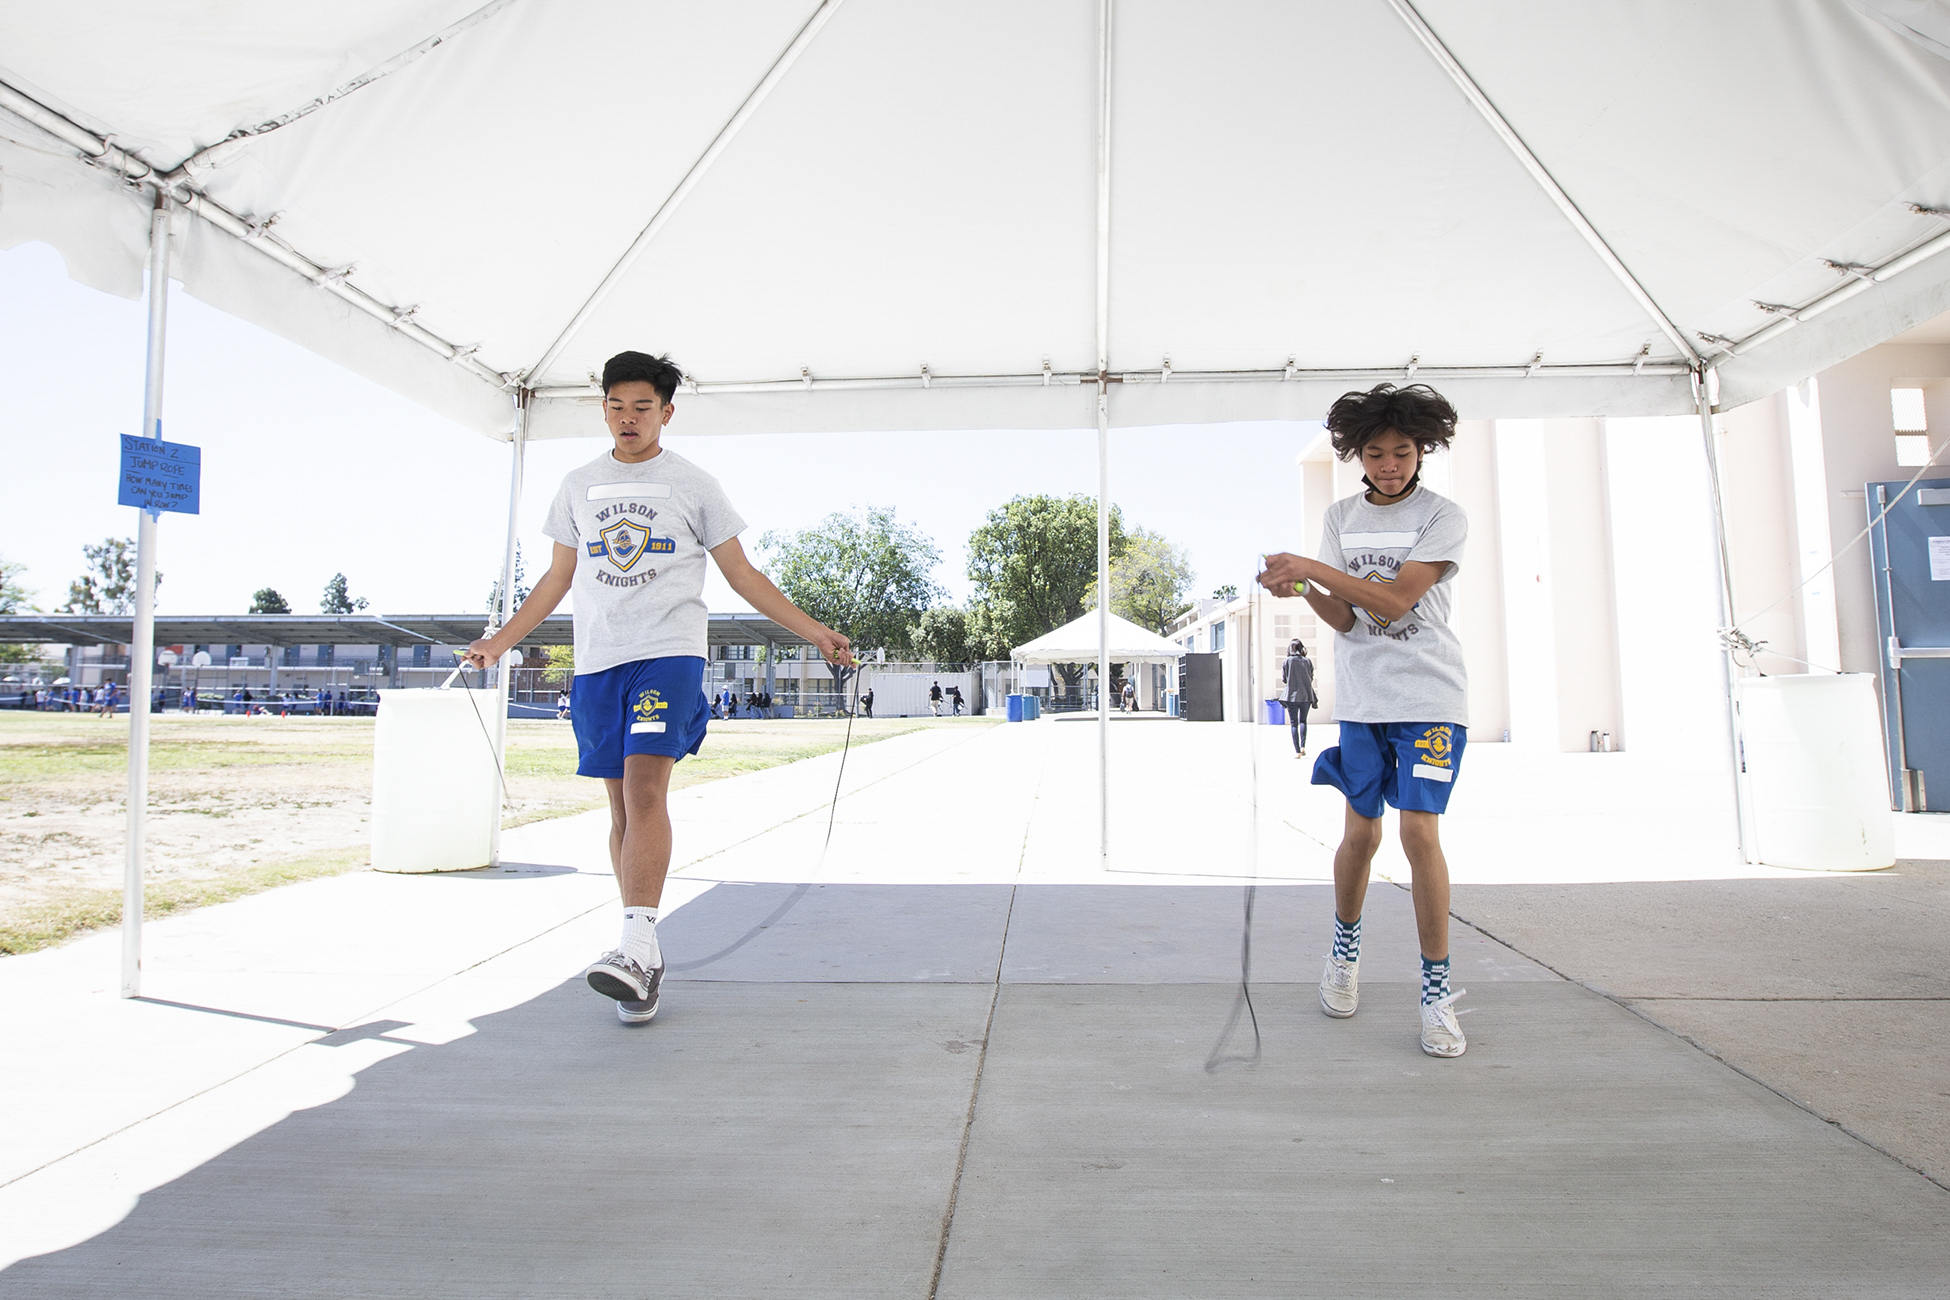 Two teen students, wearing grey and white PE uniforms with a school logo, jump rope under a canopy